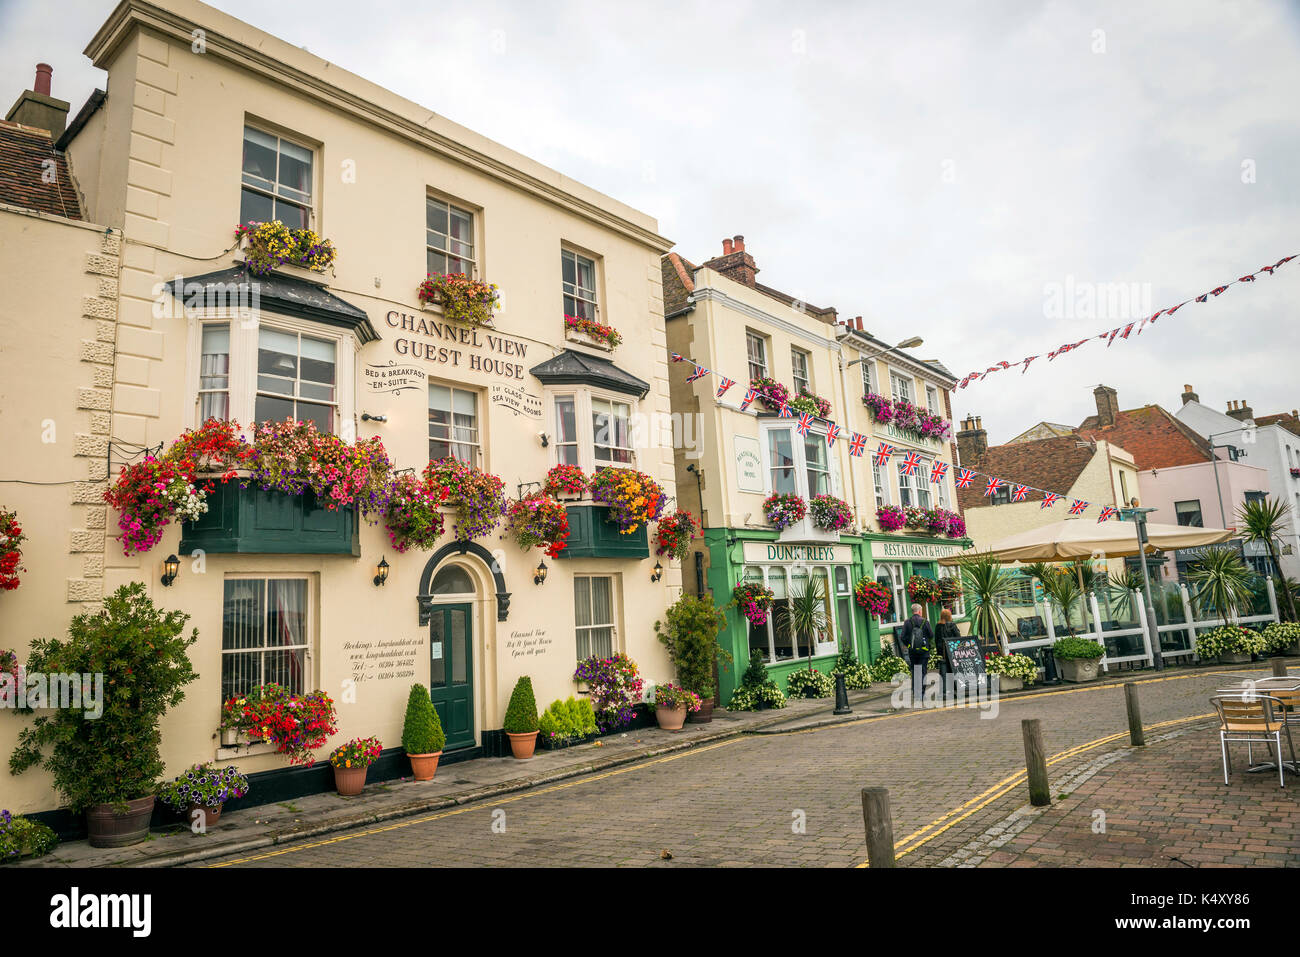 Seafront buildings decorated with hanging flower baskets in Deal, Kent, UK Stock Photo